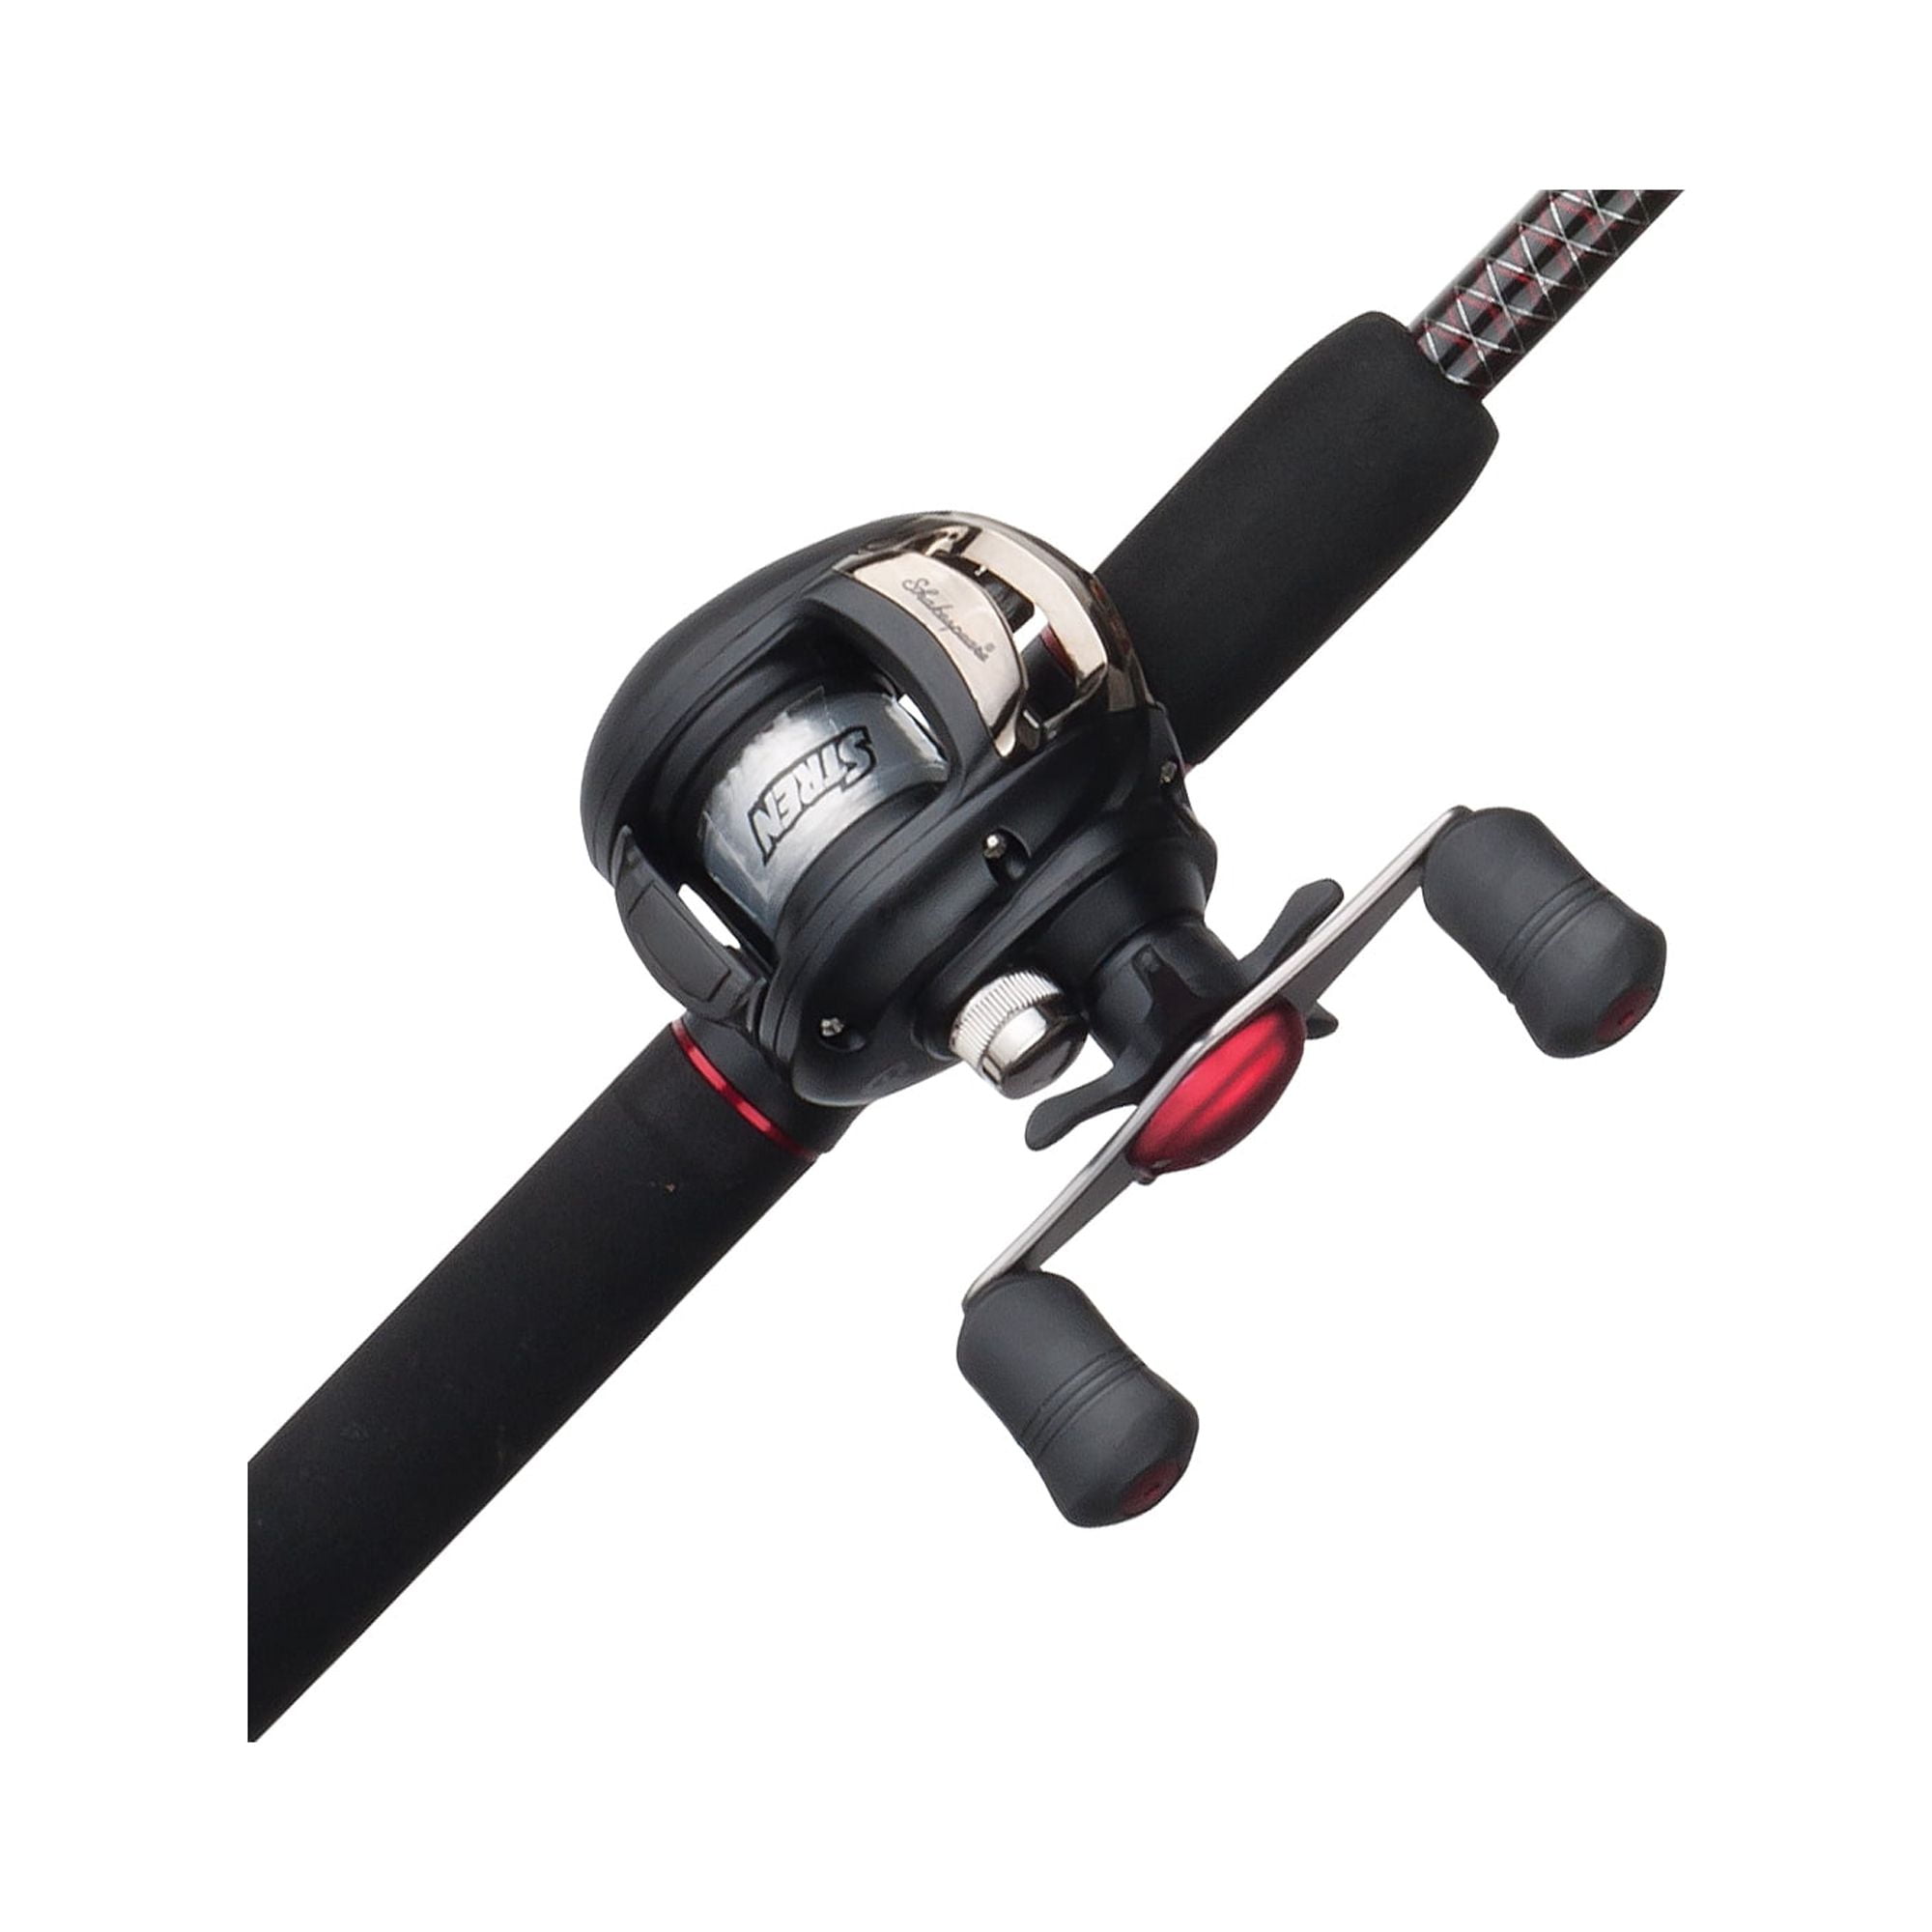  Ugly Stik 6' Hi-Lite Spincast Fishing Rod and Reel Combo,  2-Piece Graphite & Fiberglass Rod, Durable and Strong, Right/Left Handle  Position, Green : Sports & Outdoors